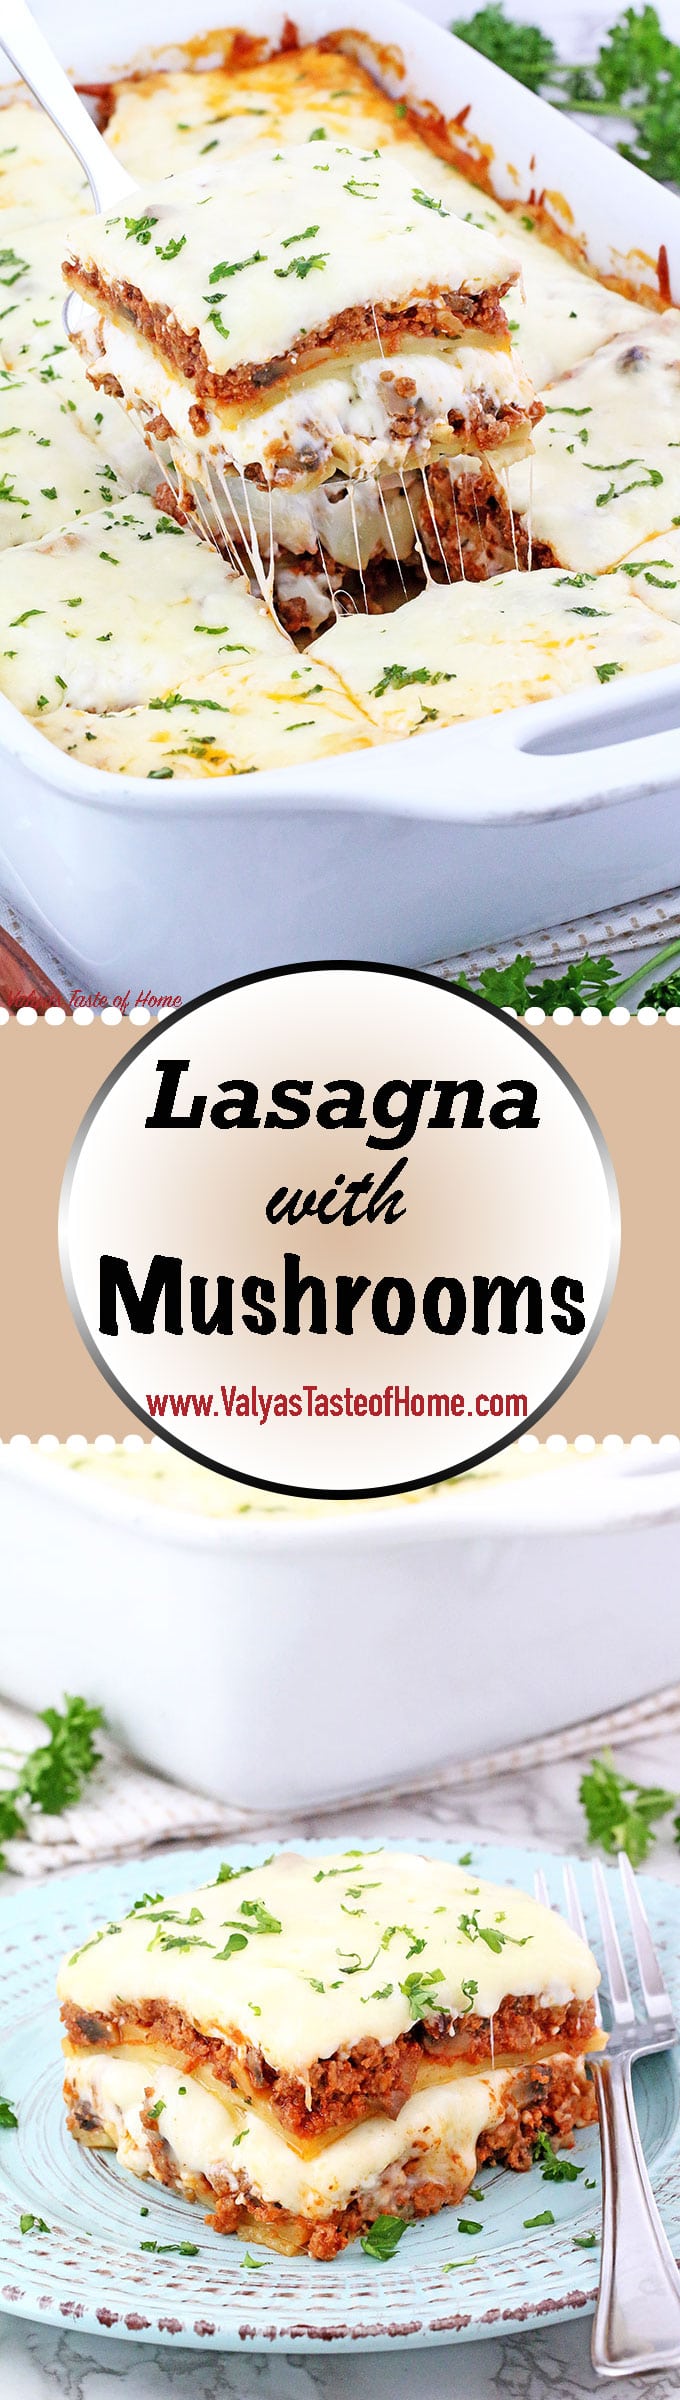 I've got the easiest and the tastiest lasagna recipe you'll ever make! It consists of very basic ingredients you most likely to have on hand. This Lasagna with Mushrooms is a perfect make-ahead dish your family will love! #familyfavorite #easyrecipe #comfortfood #kidaproved | www.valyastasteofhome.com